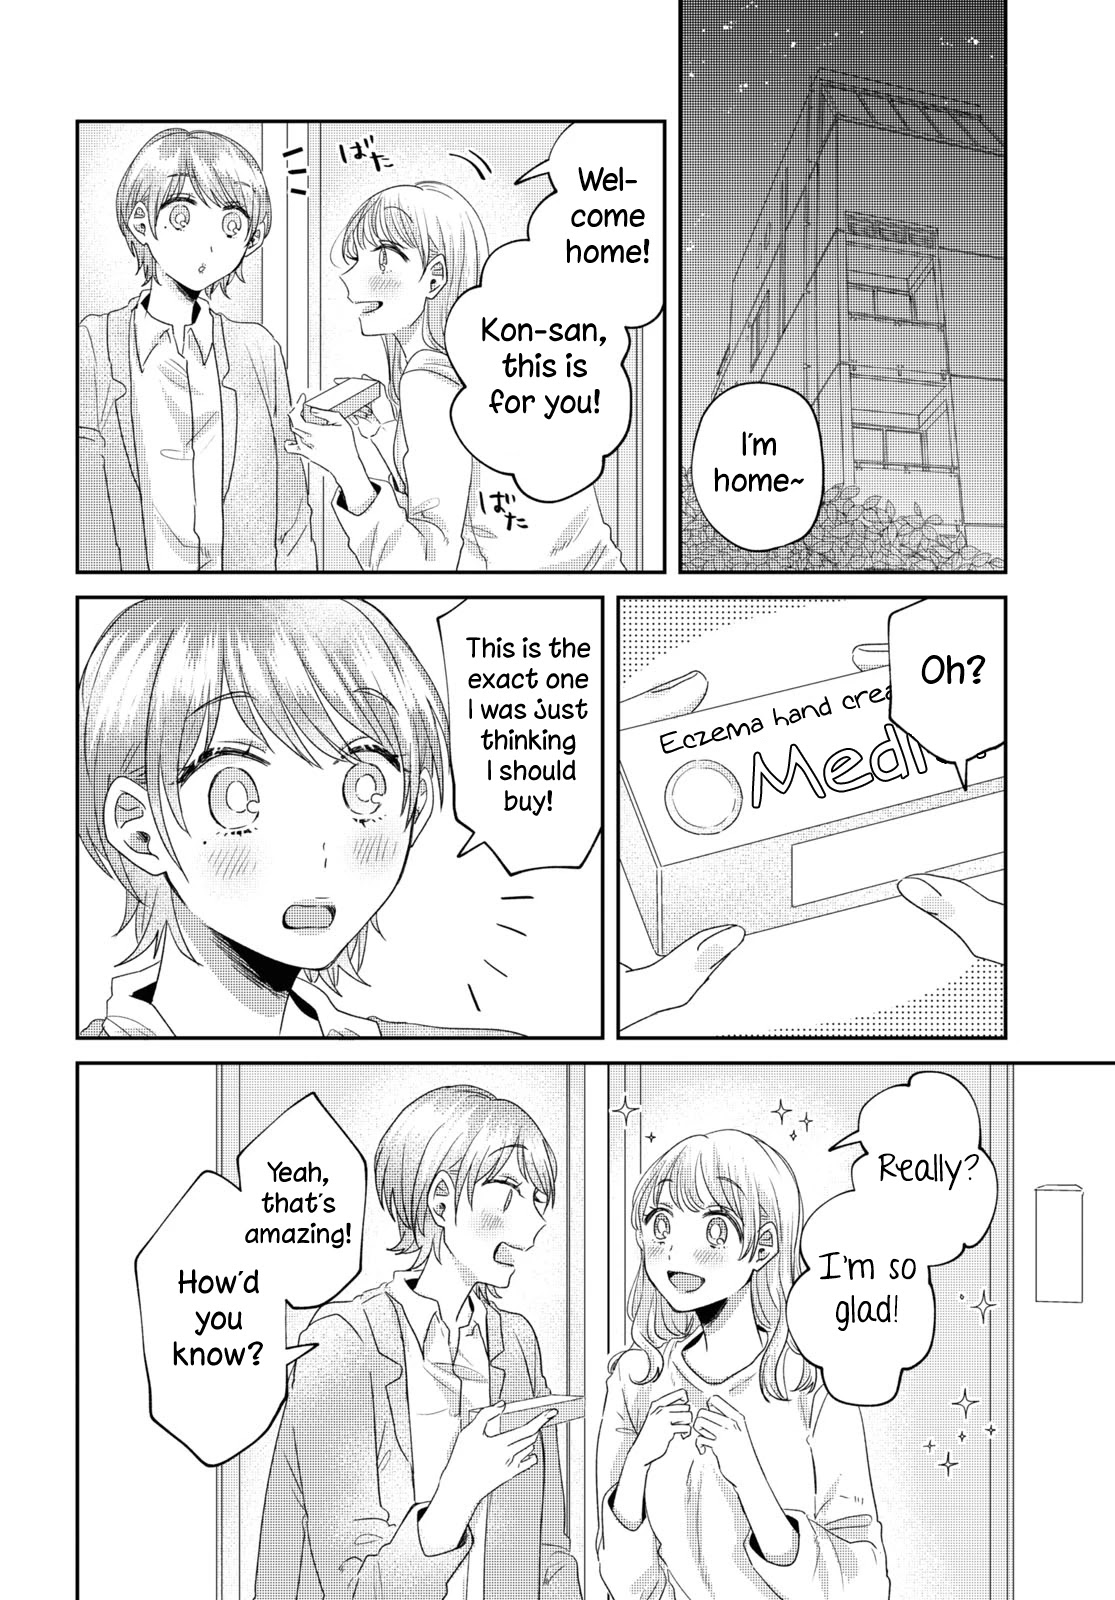 Today, We Continue Our Lives Together Under The Same Roof - Page 2